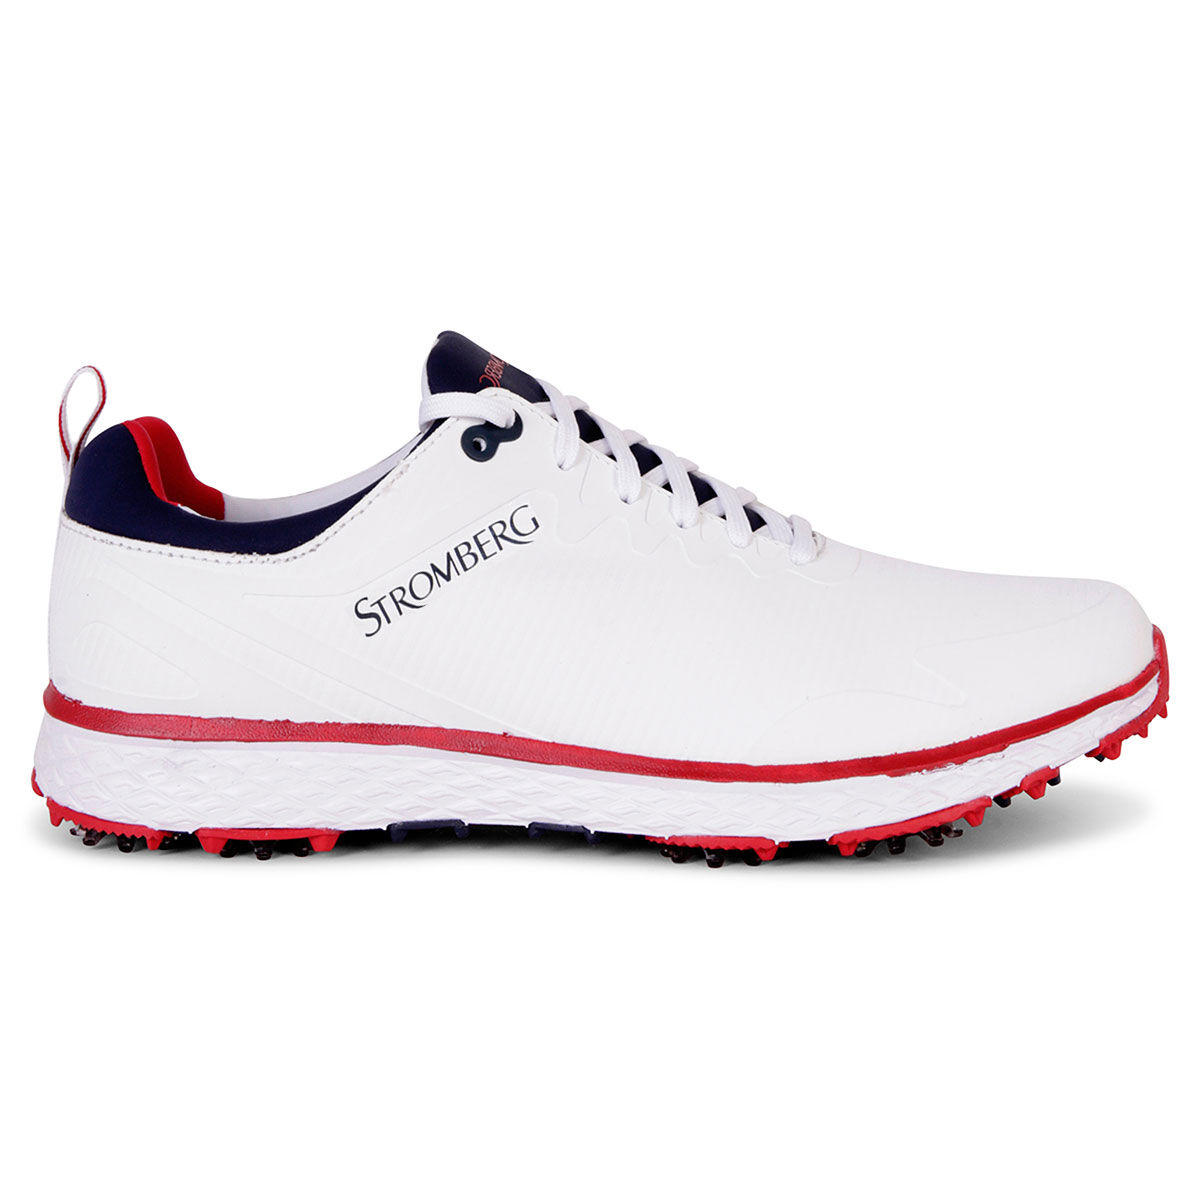 Stromberg Men's Tempo Waterproof Spiked Golf Shoes, Mens, White/navy/red, 8 | American Golf von Stromberg